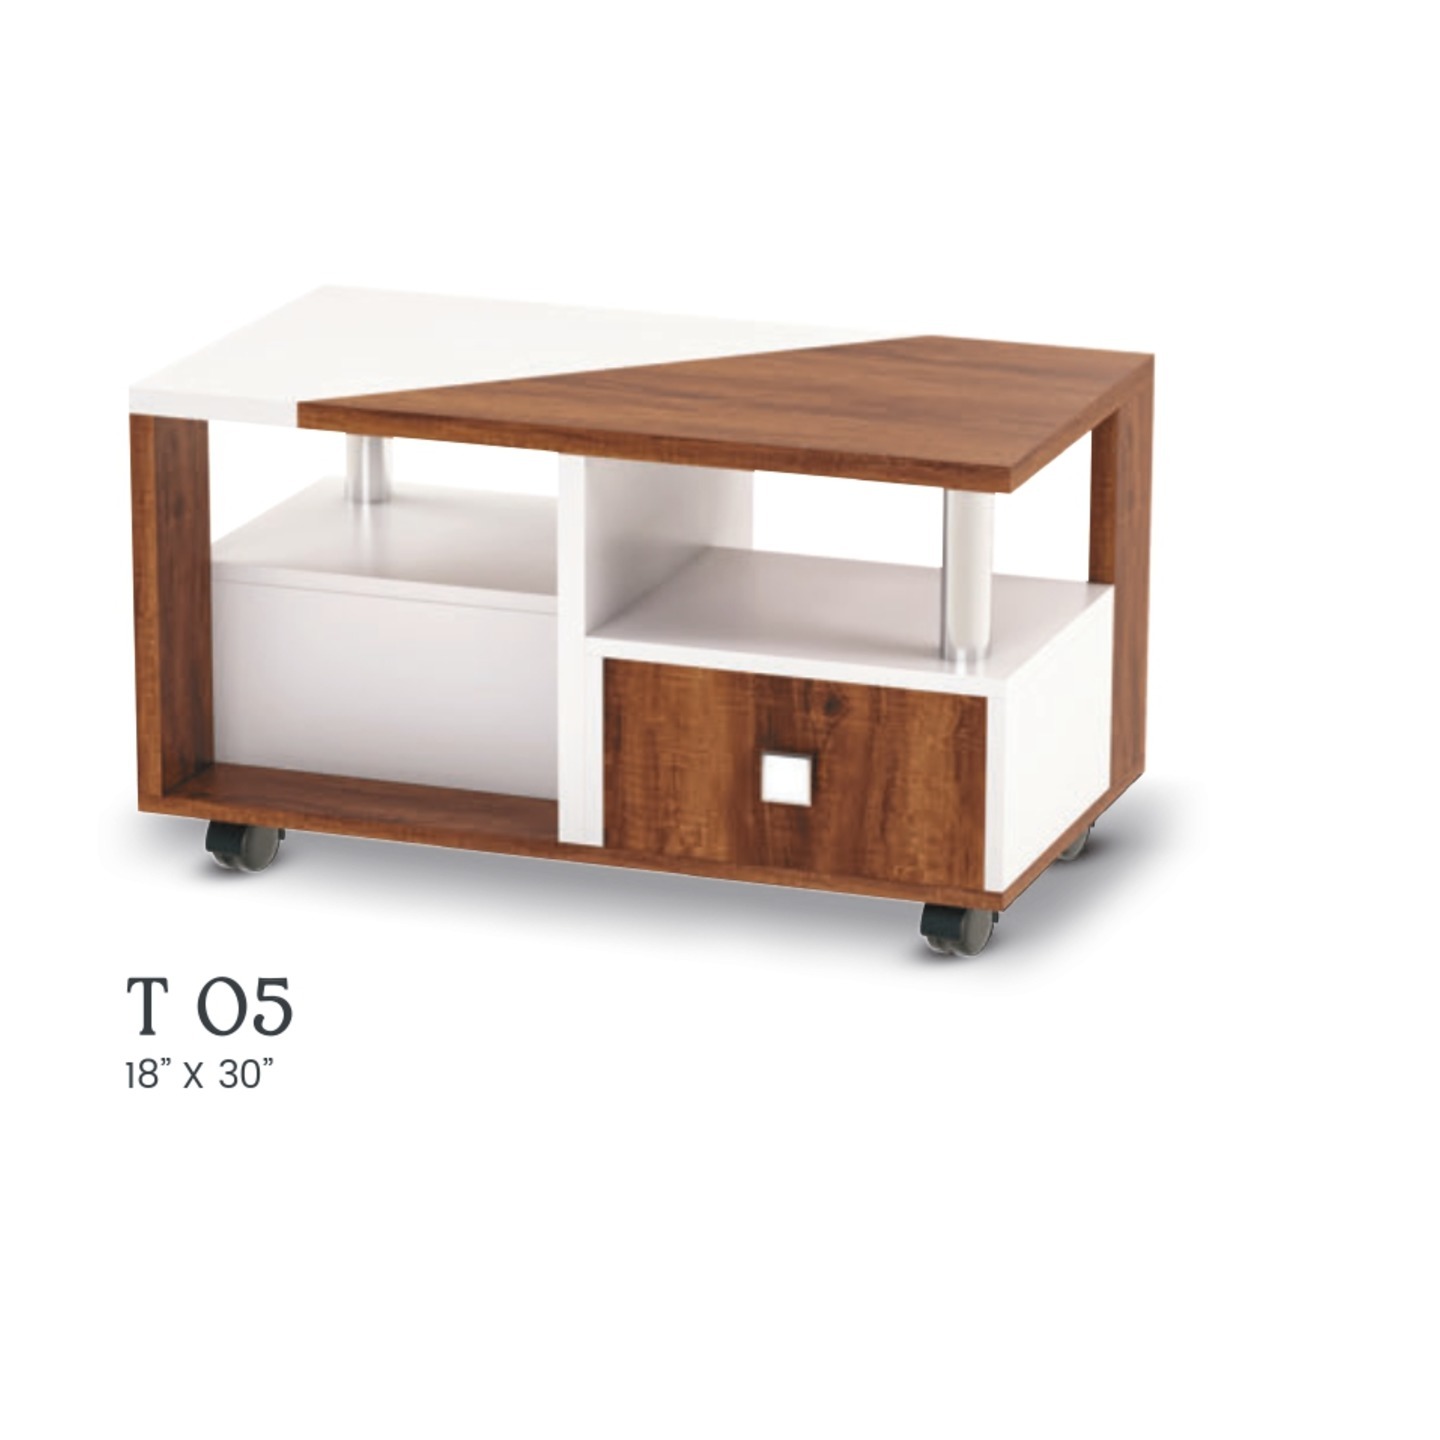 RLF Center Table T-05 With 1 Drawer In Brown Colour